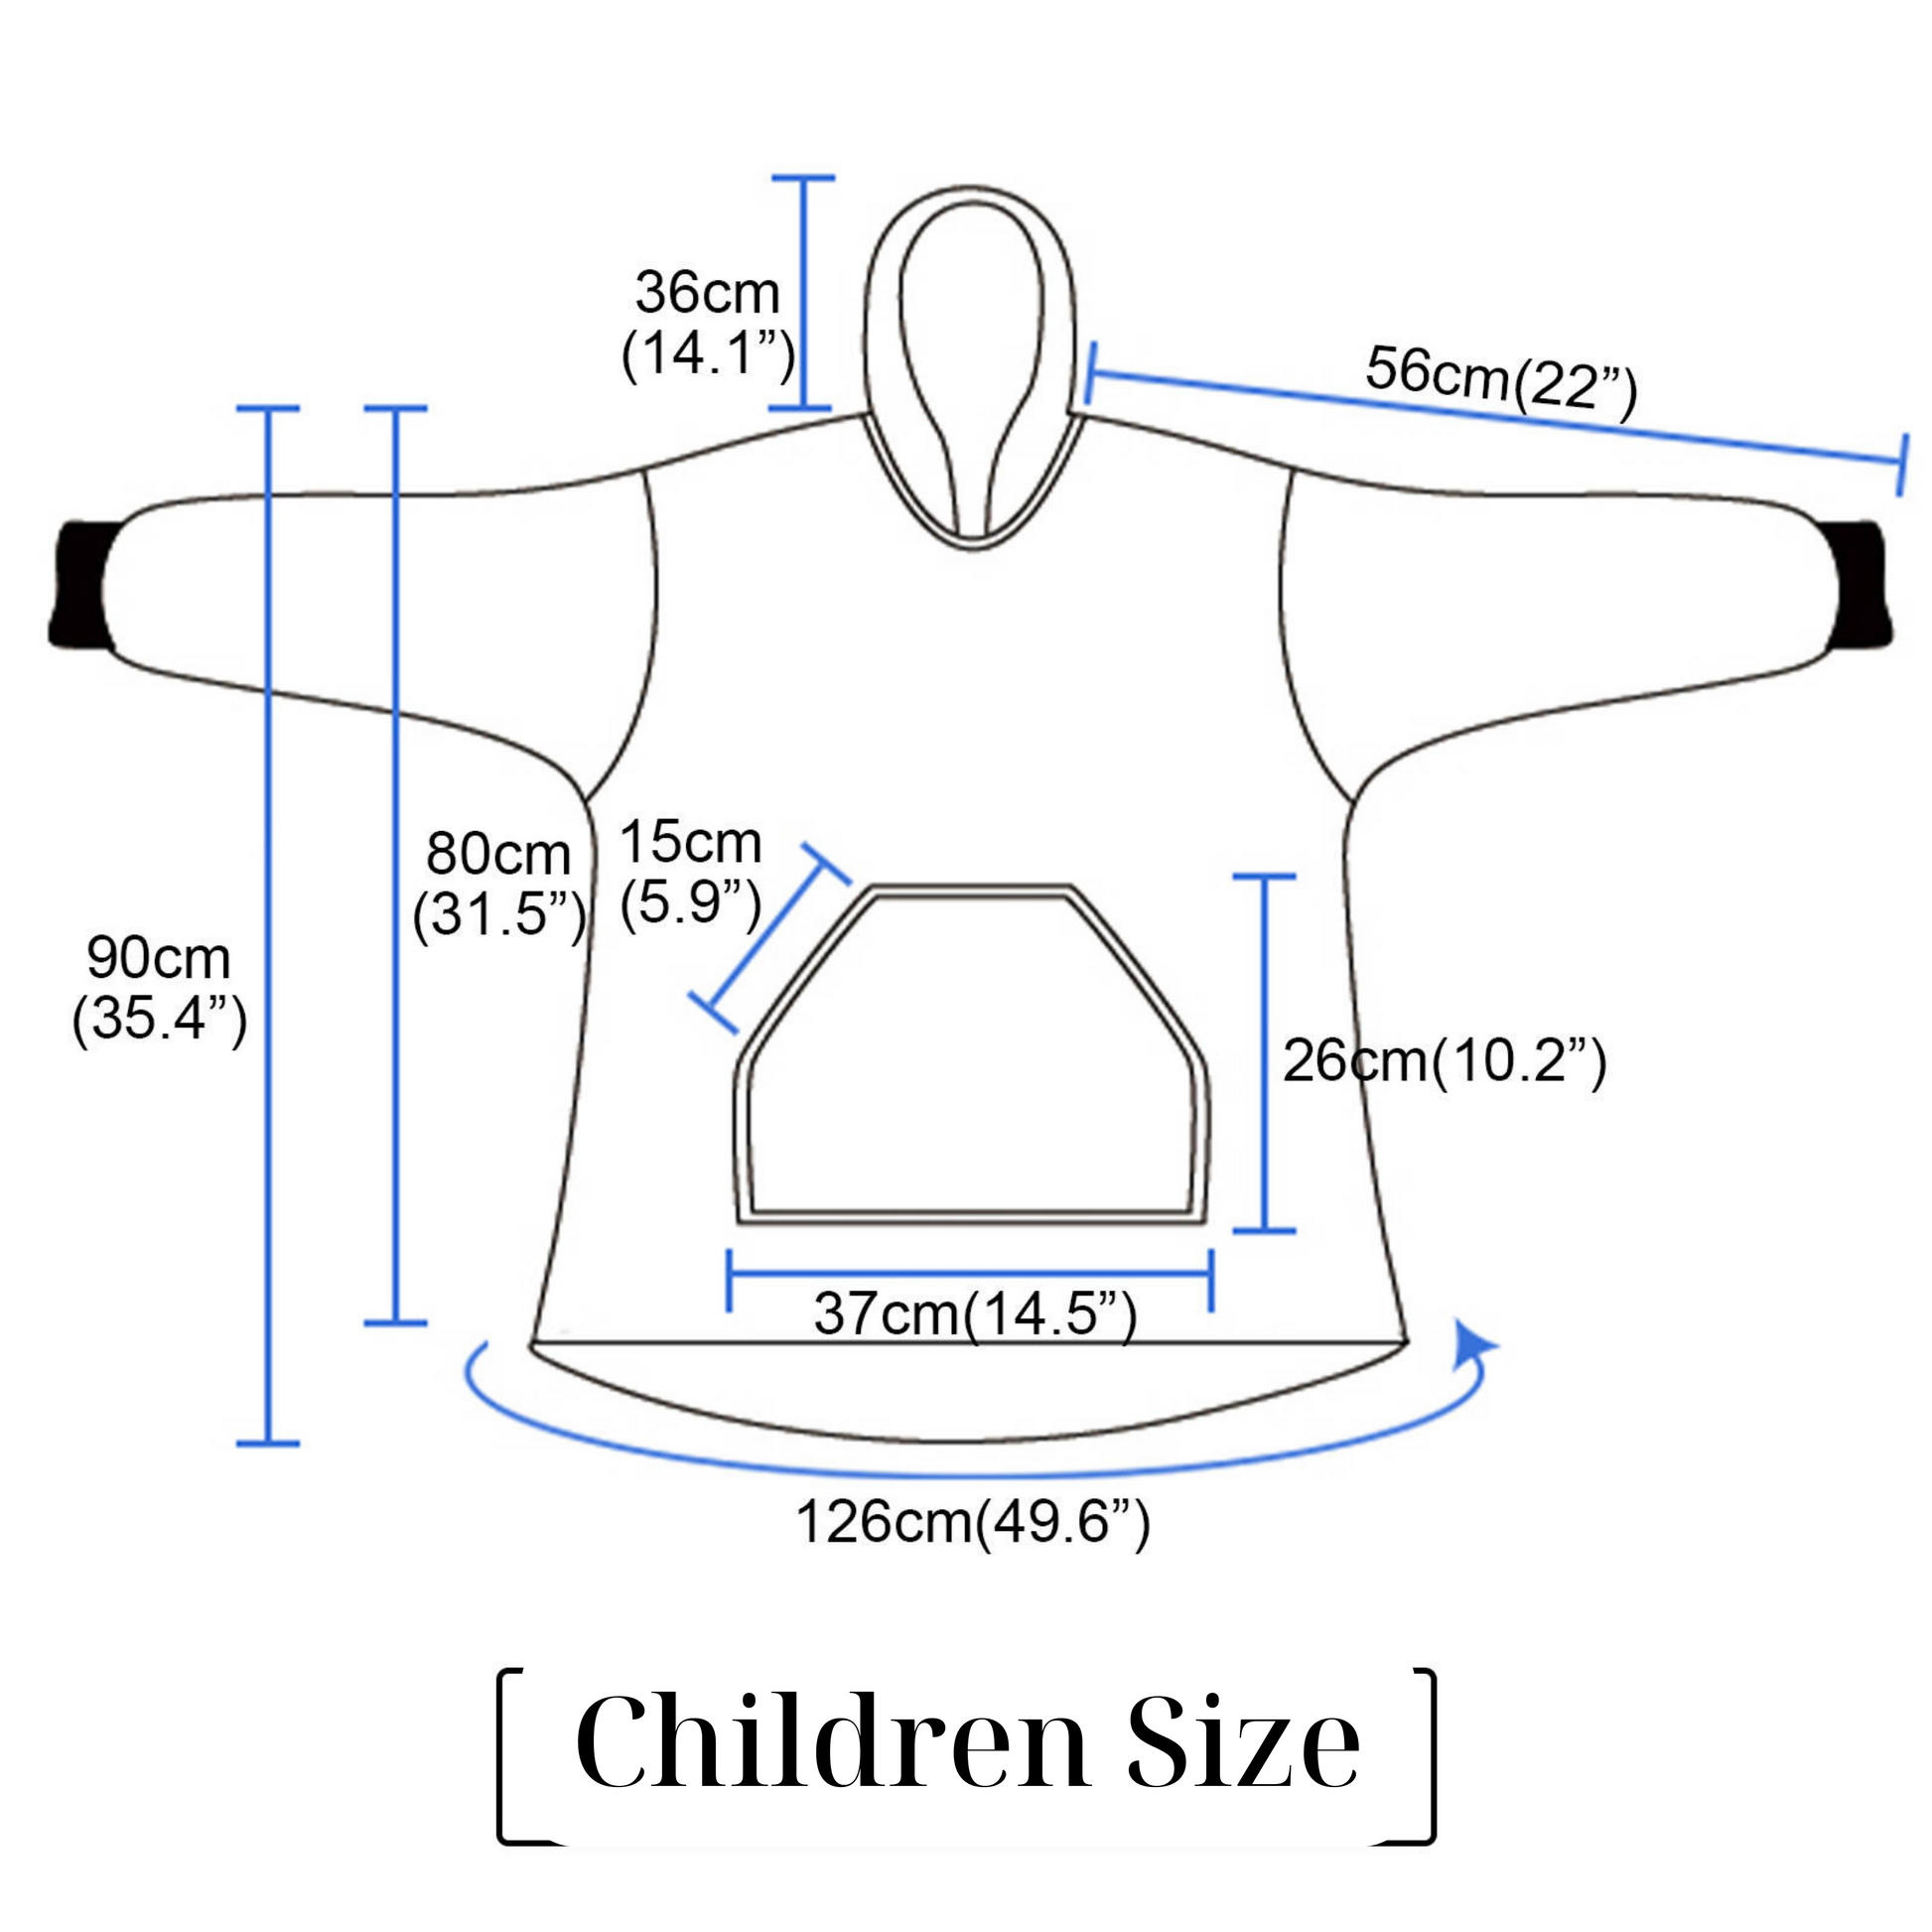 Children Size.png